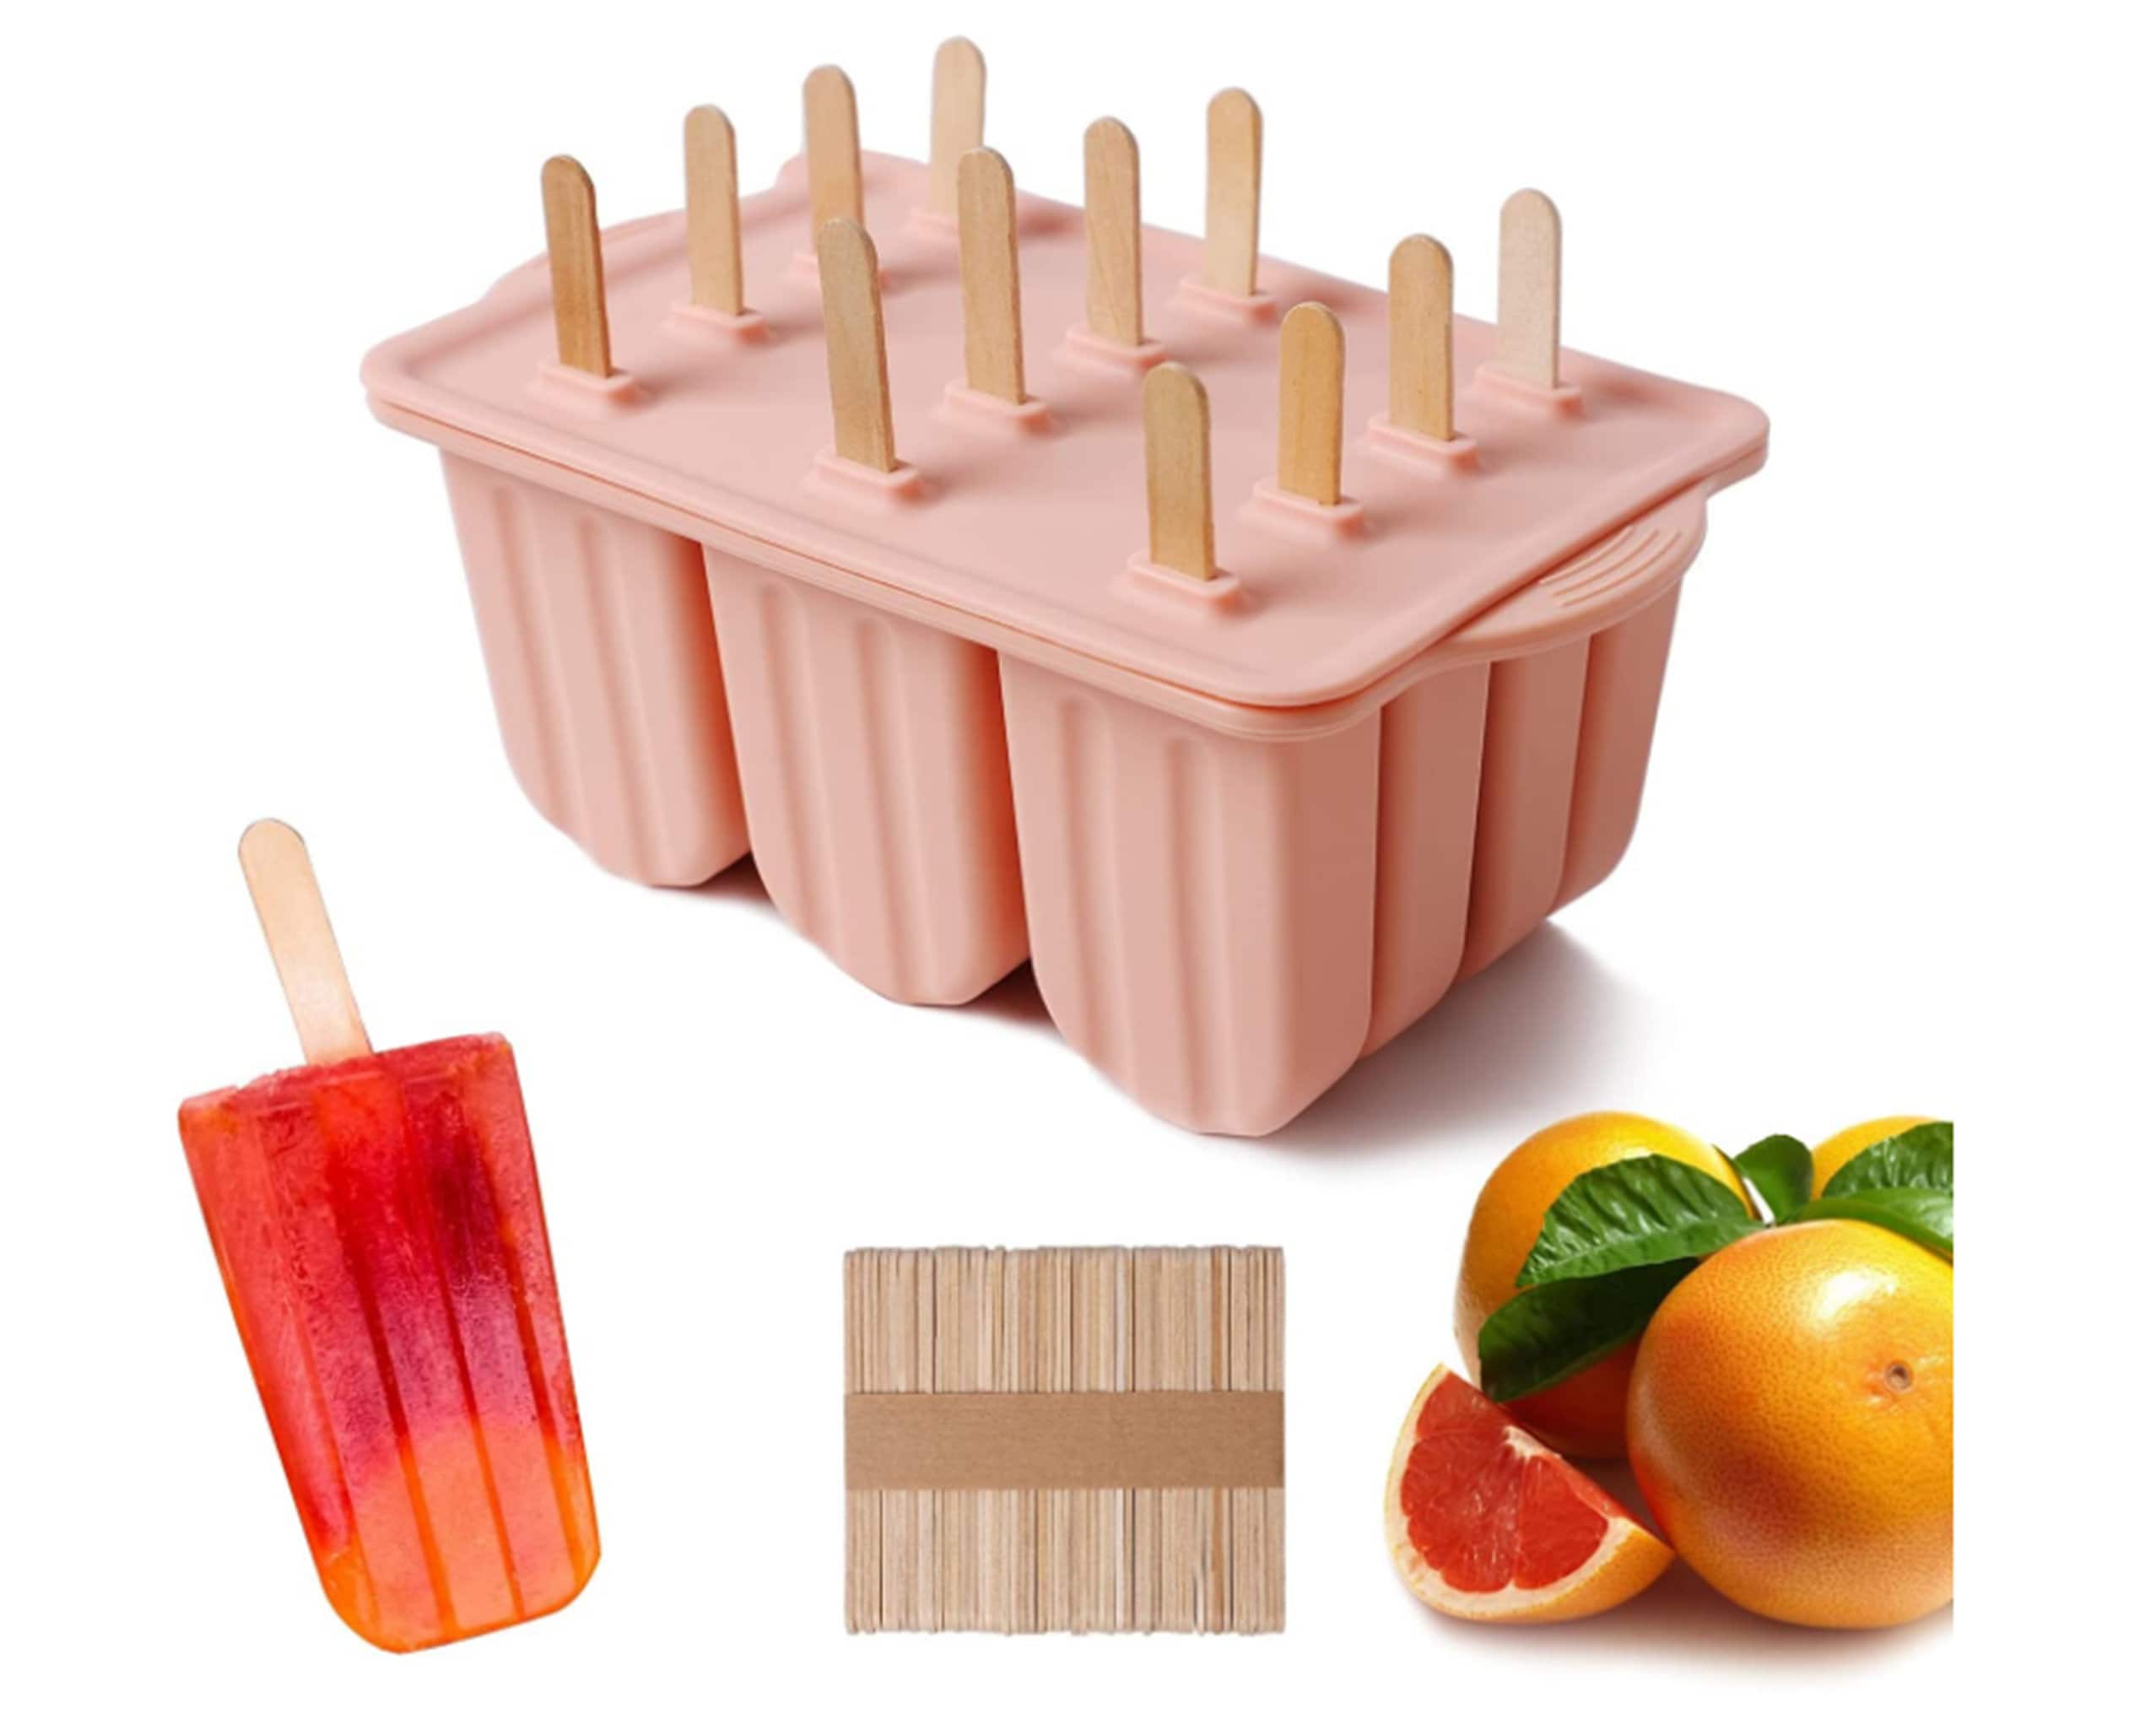 Popsicle Molds, Cakesilce Mold,silicone Popsicle Molds, Popsicle Mold 12  Pieces 50 Popsicle Sticks pink 